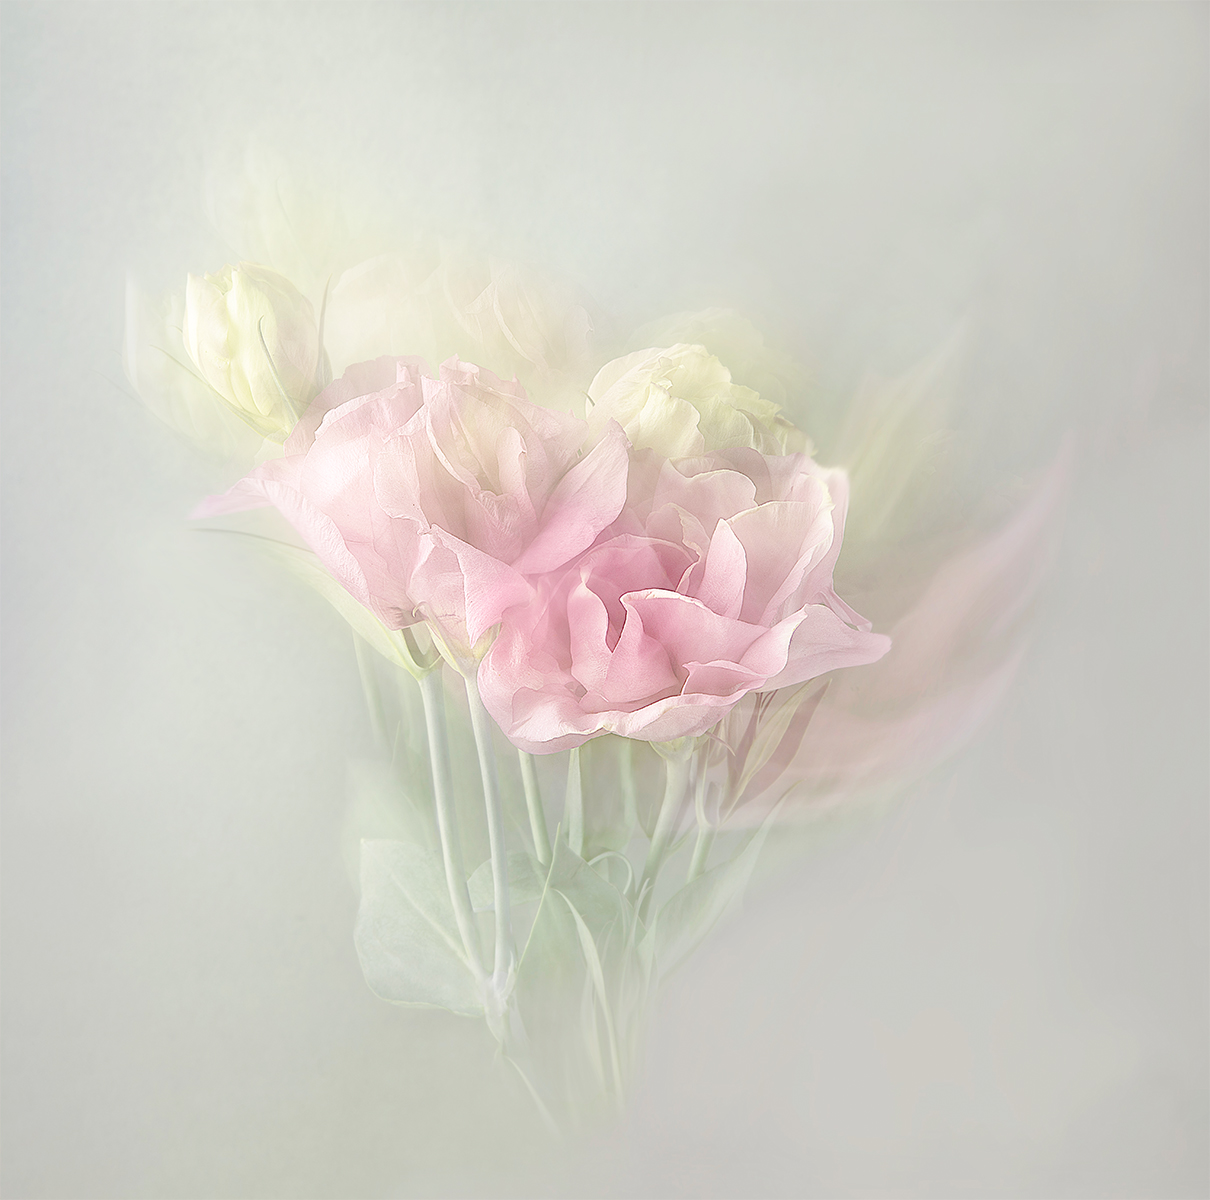 Lovely Lisianthus by Hilary Bailey LRPS CPAGB